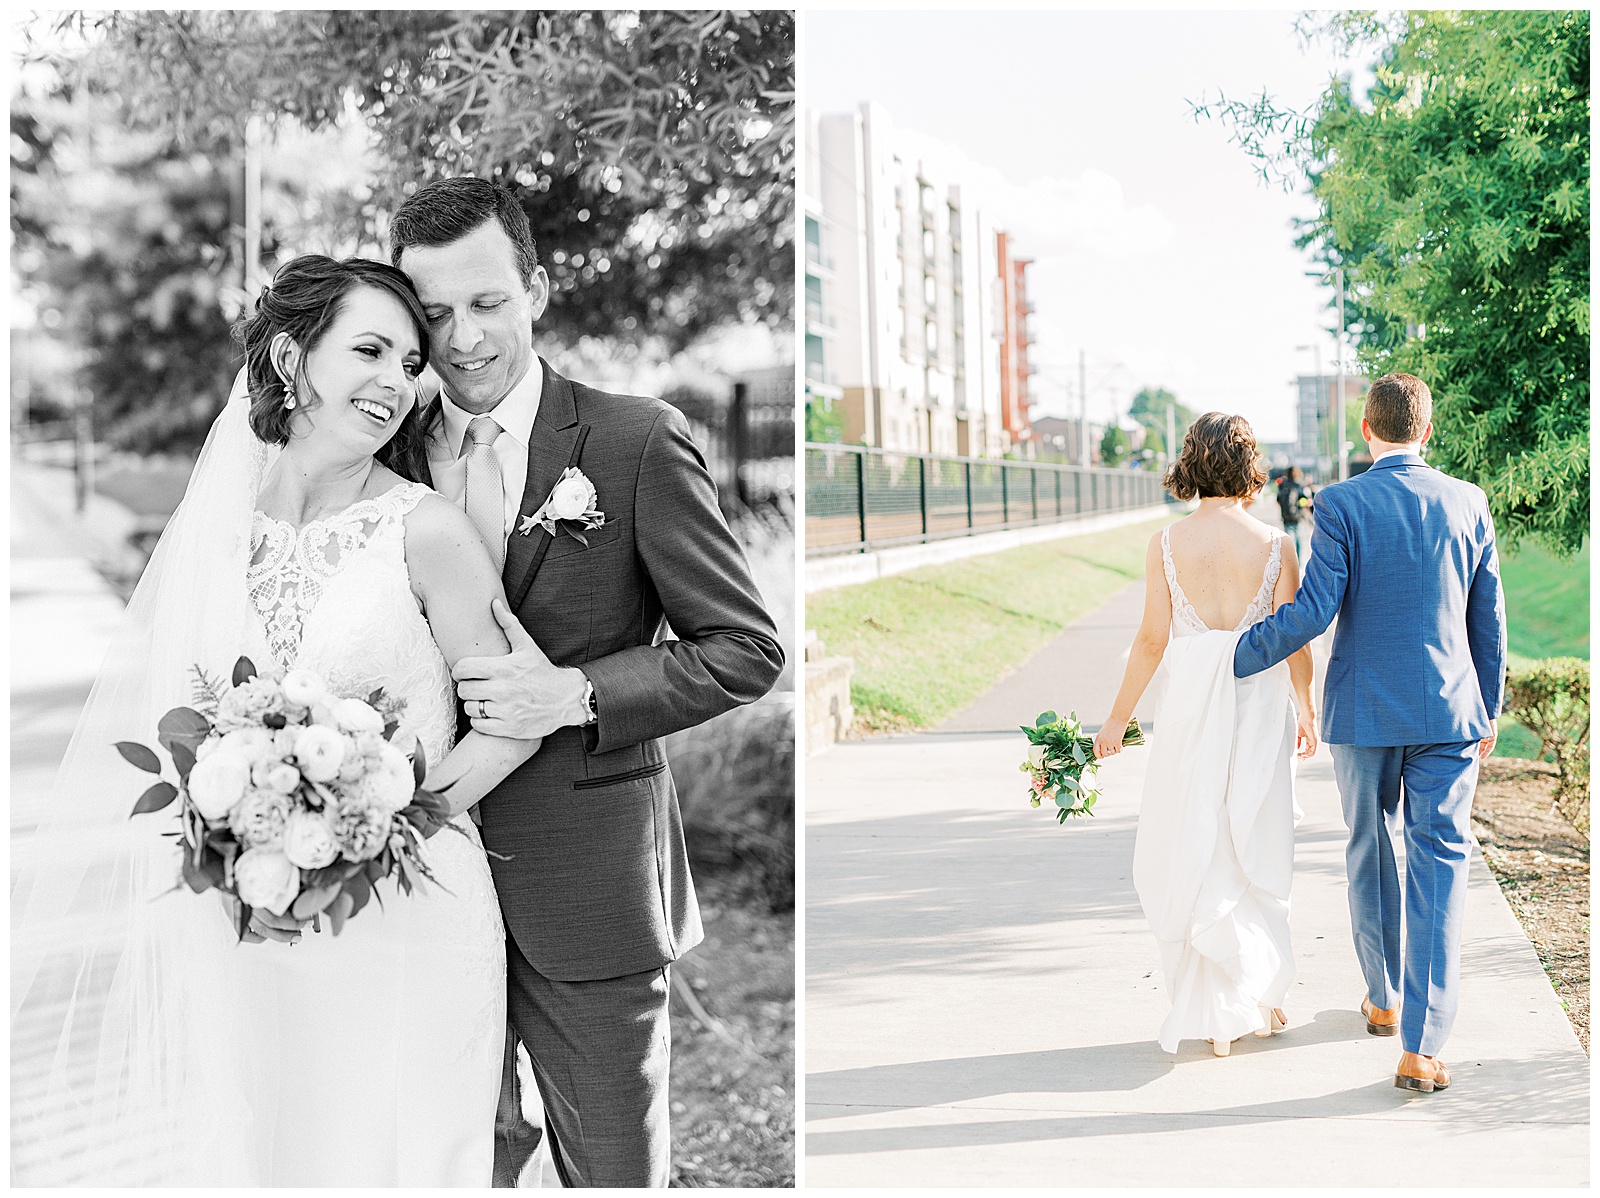 gorgeous veil shots from outdoor summer bride groom portraits on city sidewalk of short brown haired bride in lace dress with long train and navy blue suited groom